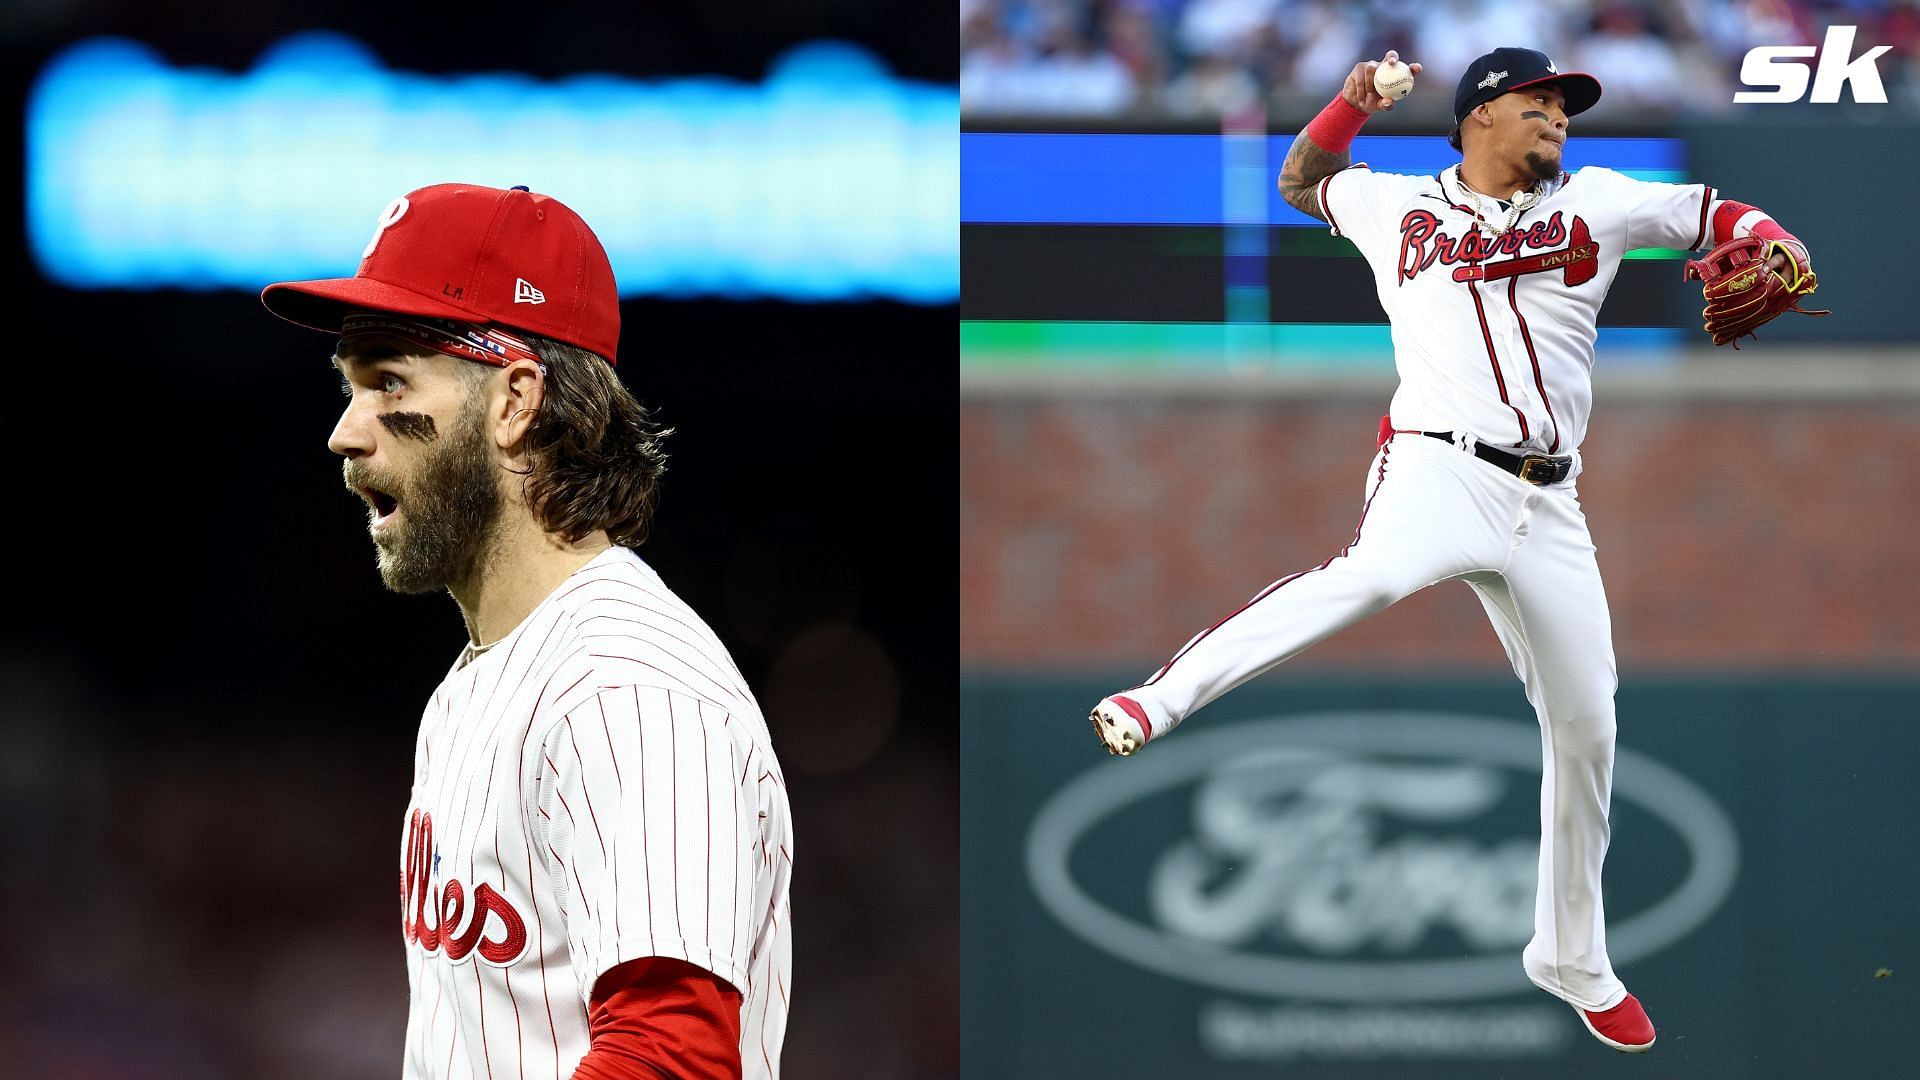 Phillies Mocked Orlando Arcia's Comment About Bryce Harper With T